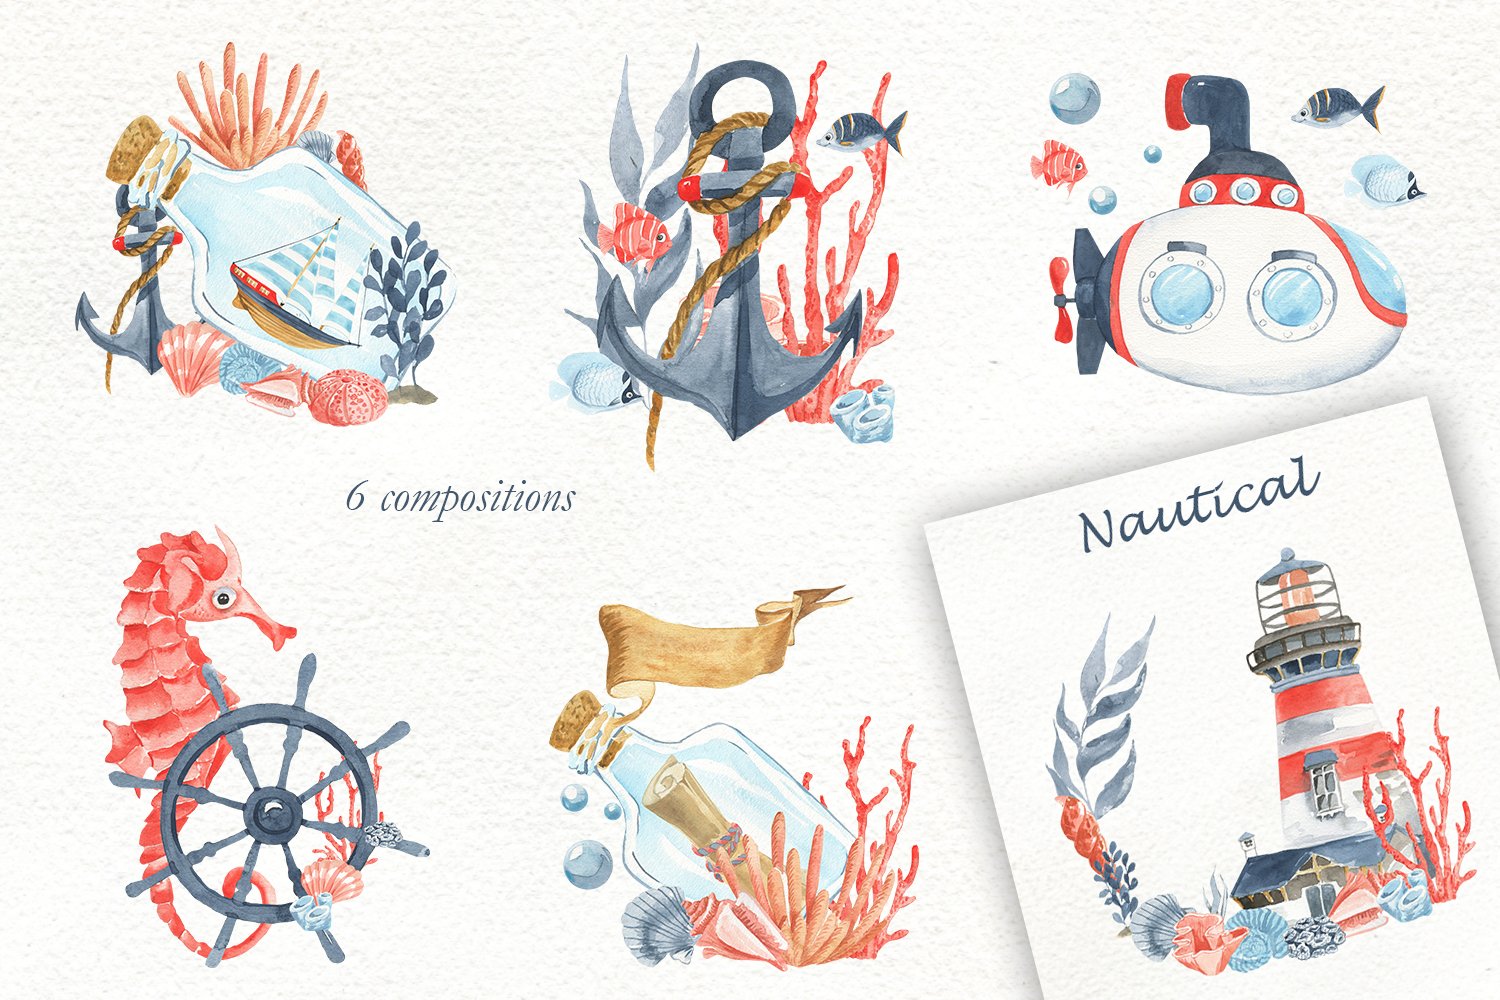 There are 6 sea watercolor compositions.